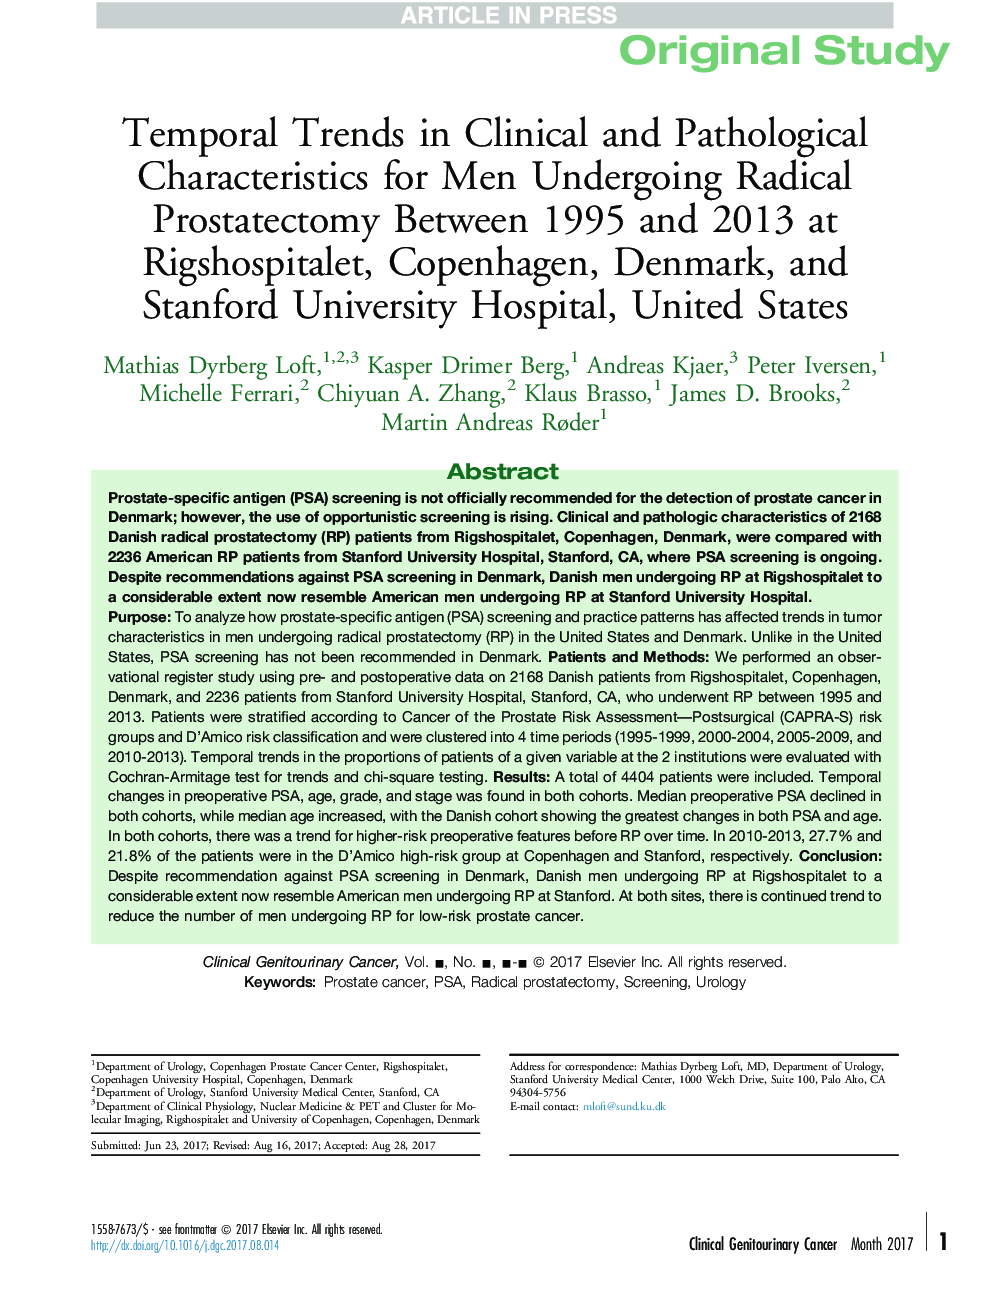 Temporal Trends in Clinical and Pathological Characteristics for Men Undergoing Radical Prostatectomy Between 1995 and 2013 at Rigshospitalet, Copenhagen, Denmark, and Stanford University Hospital, United States